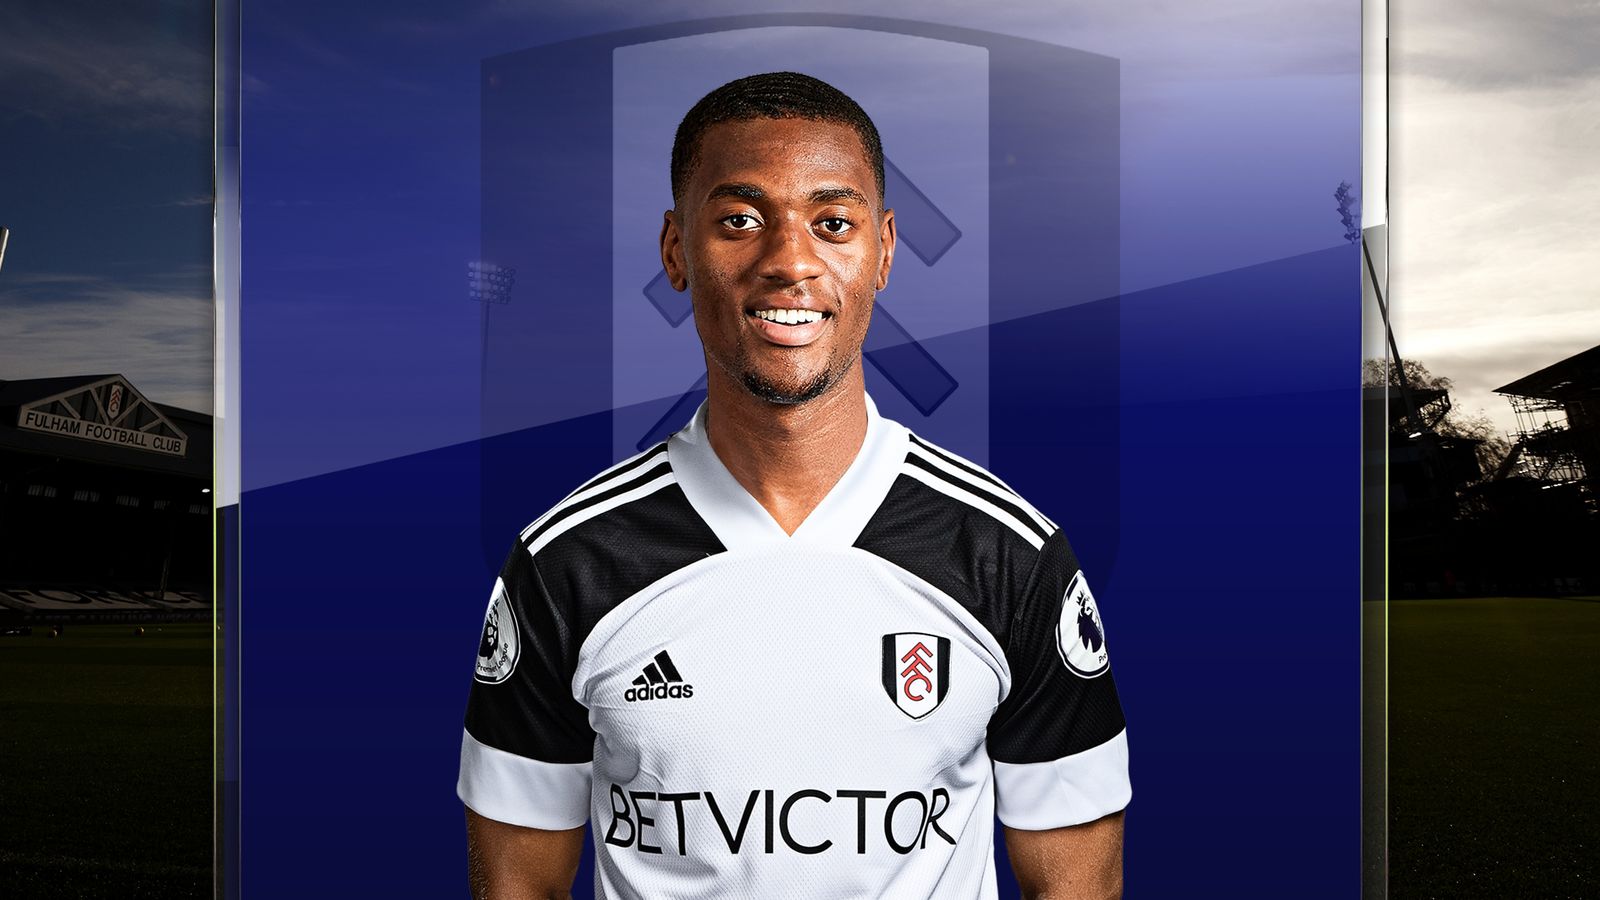  Tosin Adarabioyo is a professional footballer who plays as a defender for Fulham.